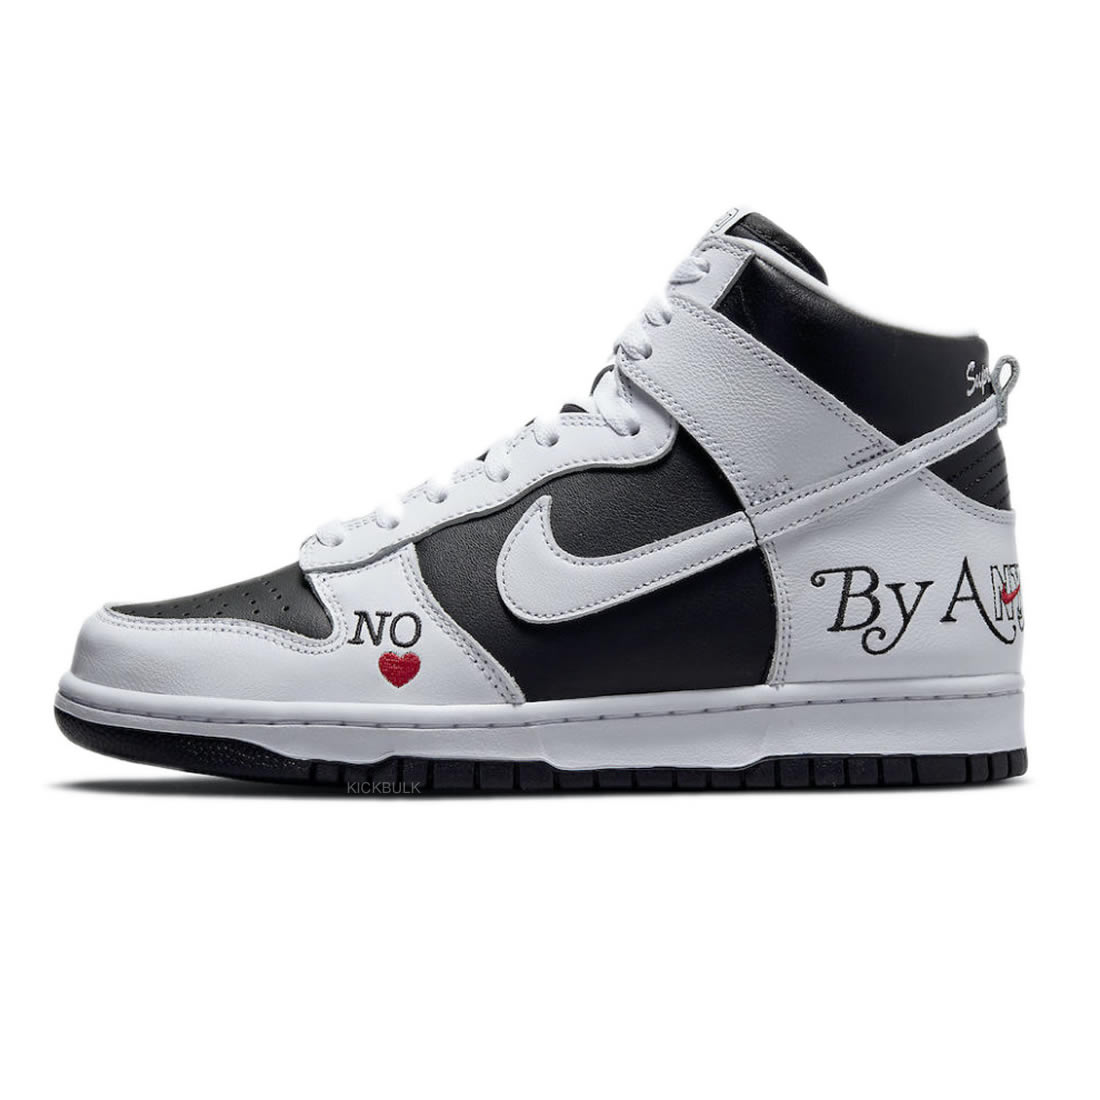 Supreme Nike Dunk High Sb By Any Means Stormtrooper Dn3741 002 1 - kickbulk.co